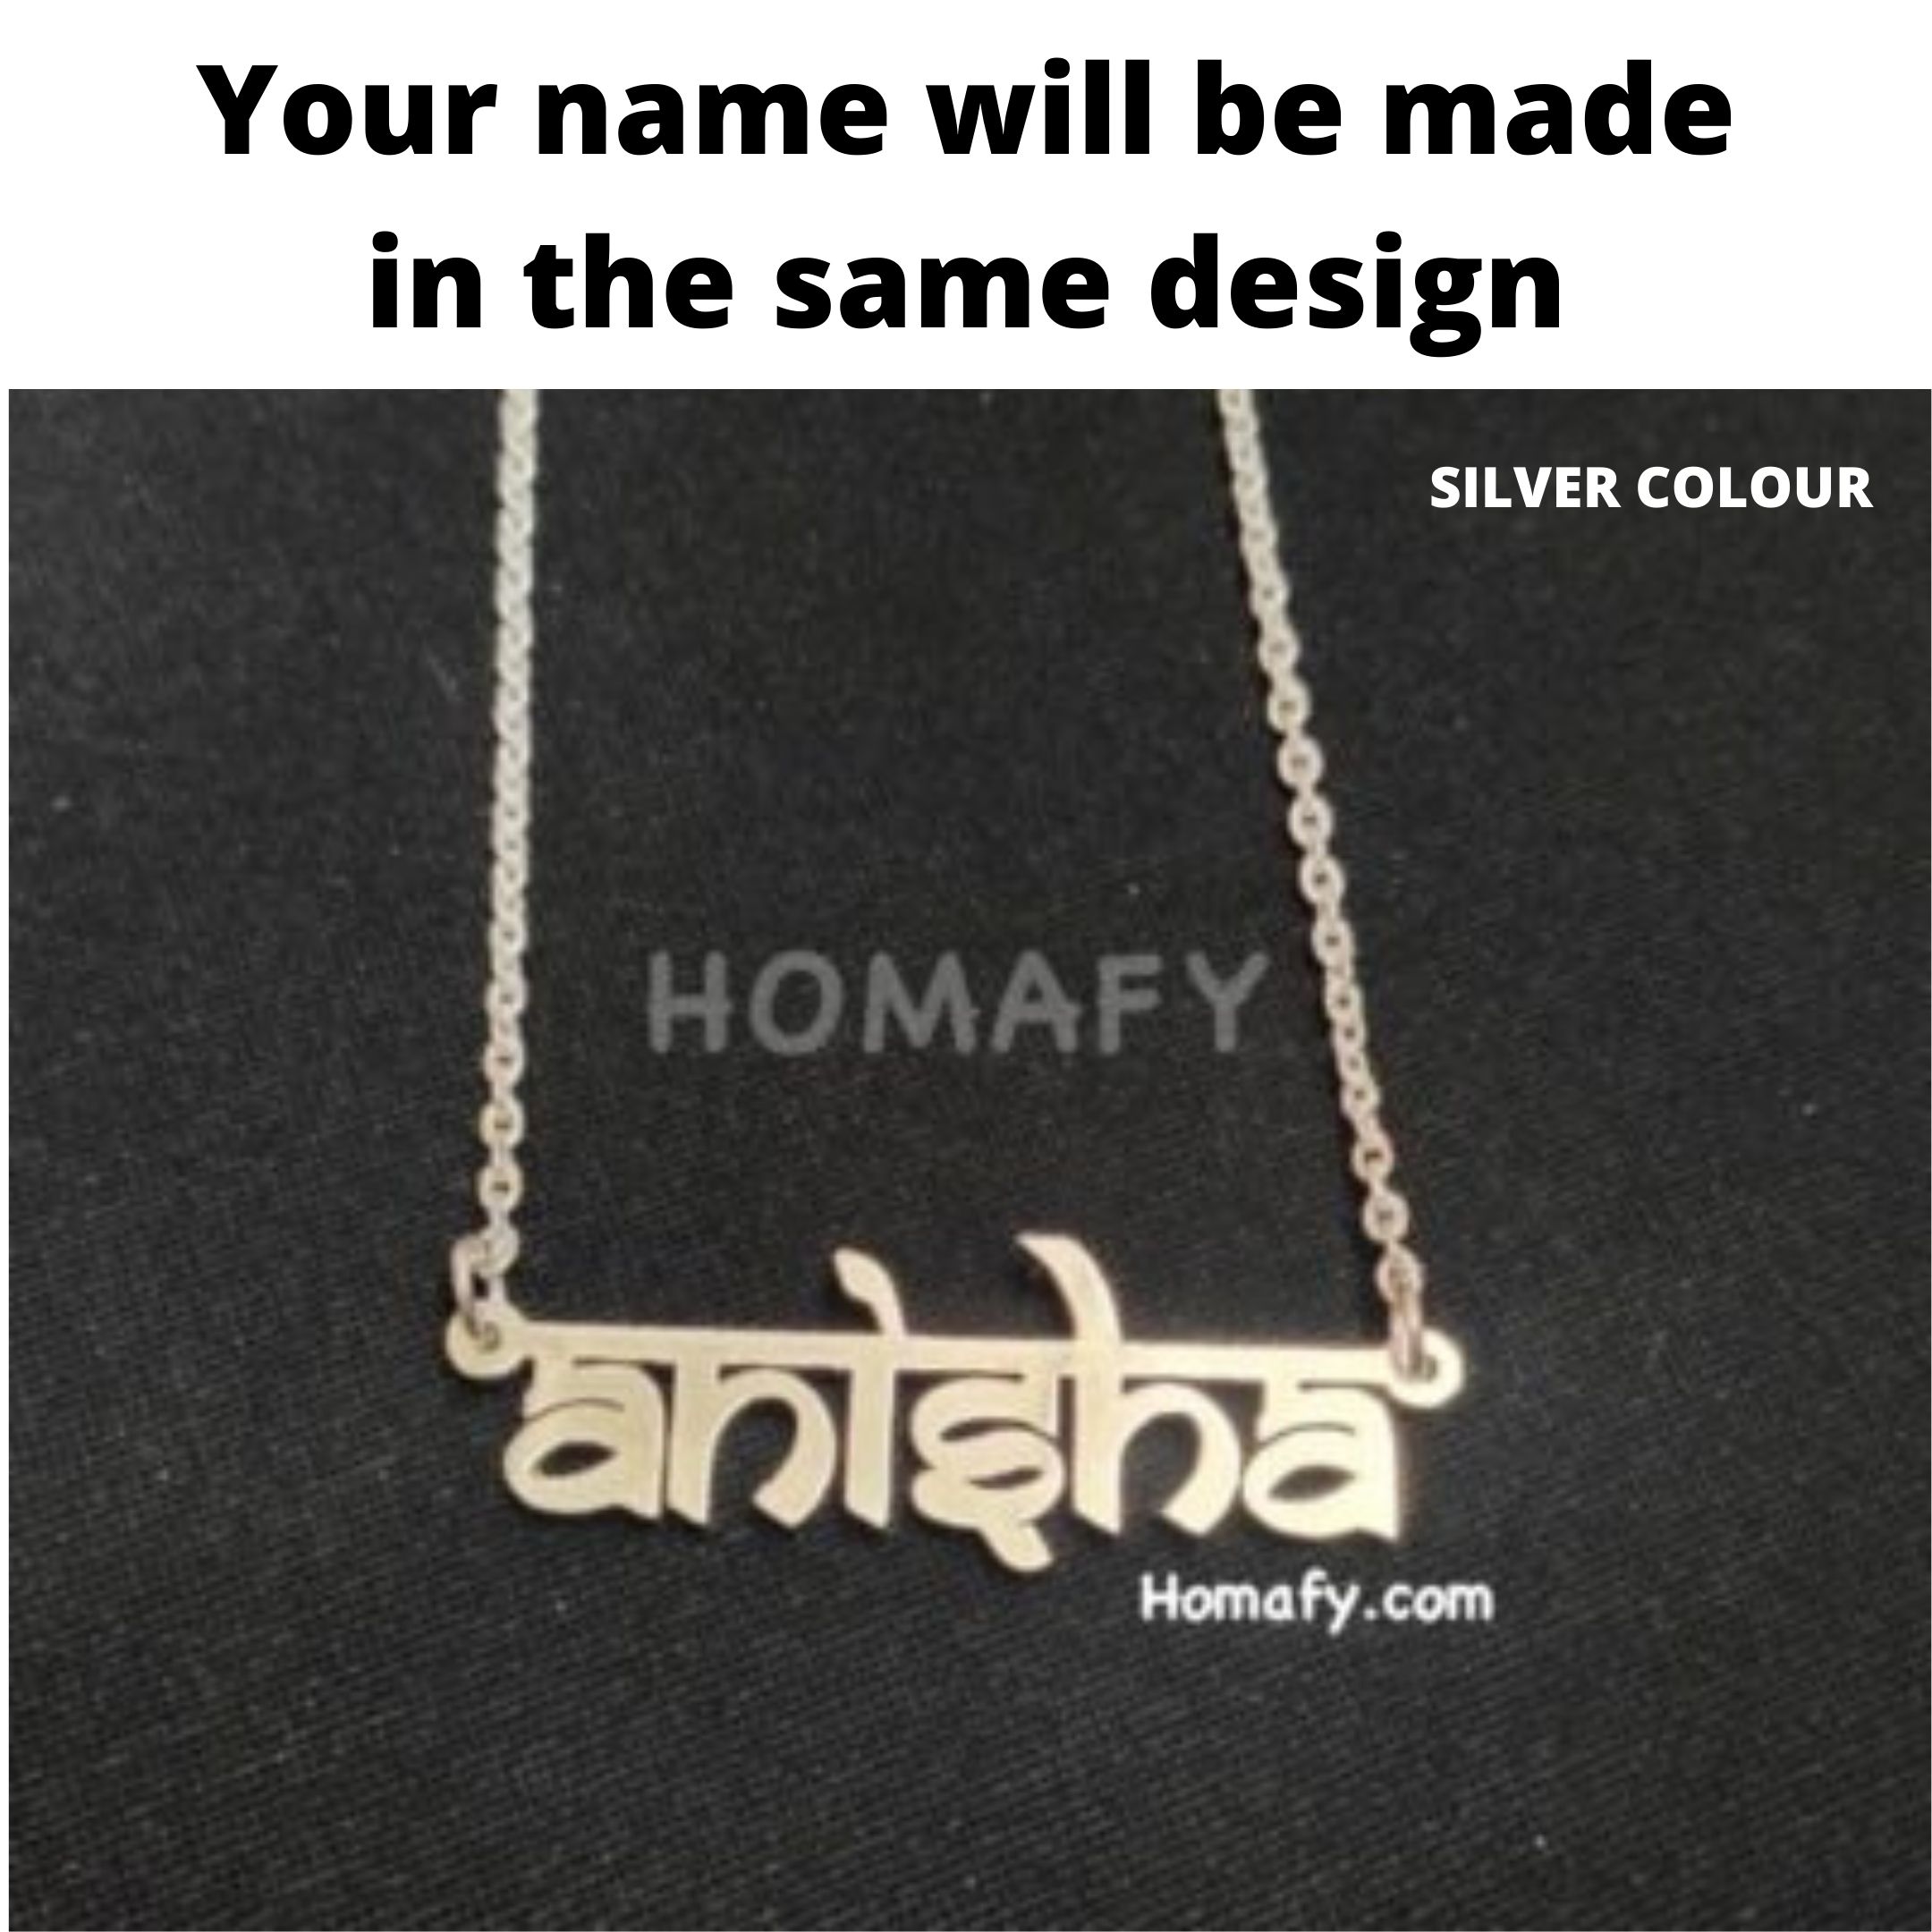 Gold Plated Name Pendant Homafy